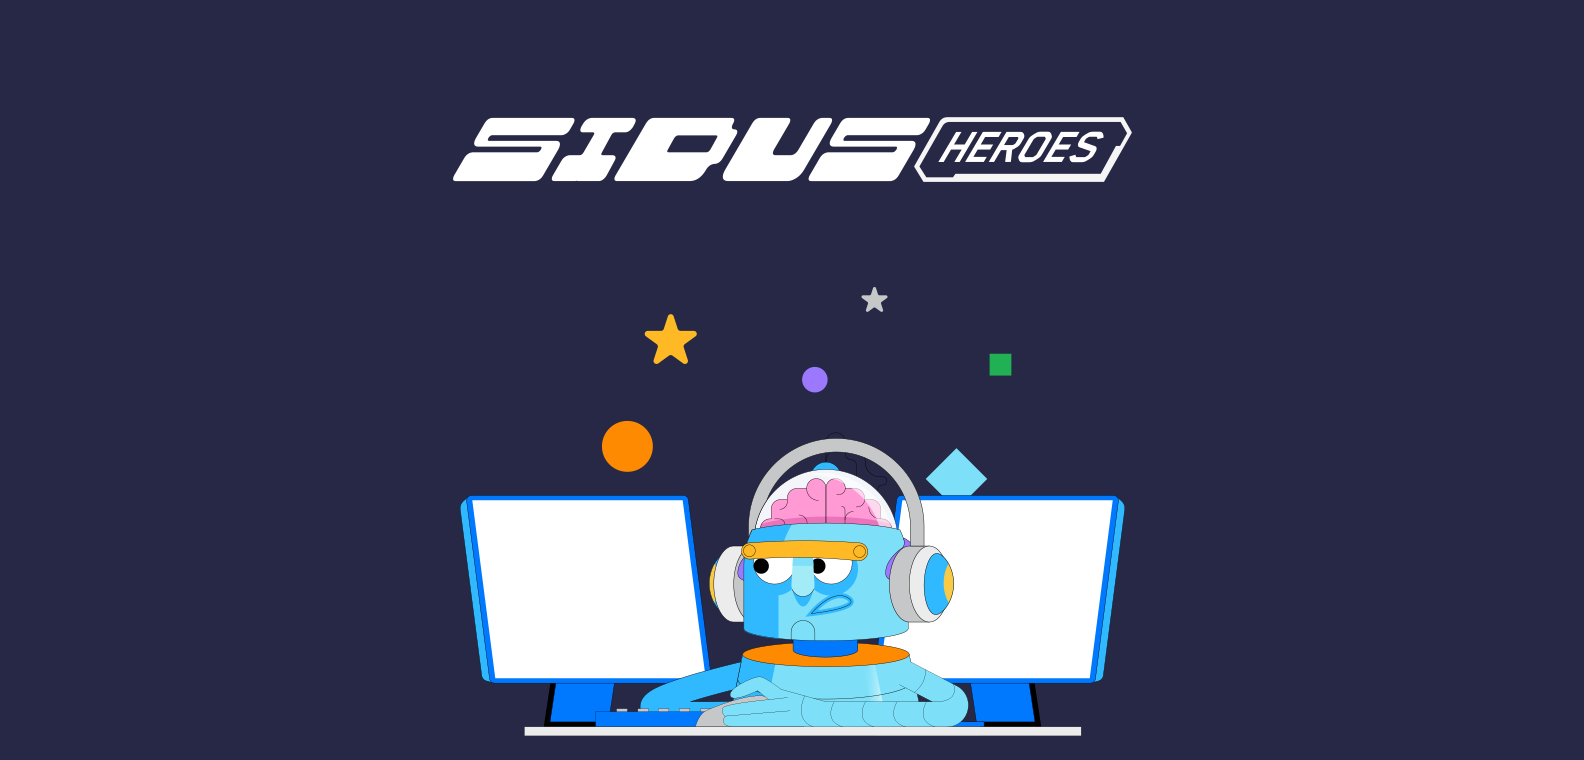 Sidus Heroes: A Game With NFT And Play-To-Earn Elements